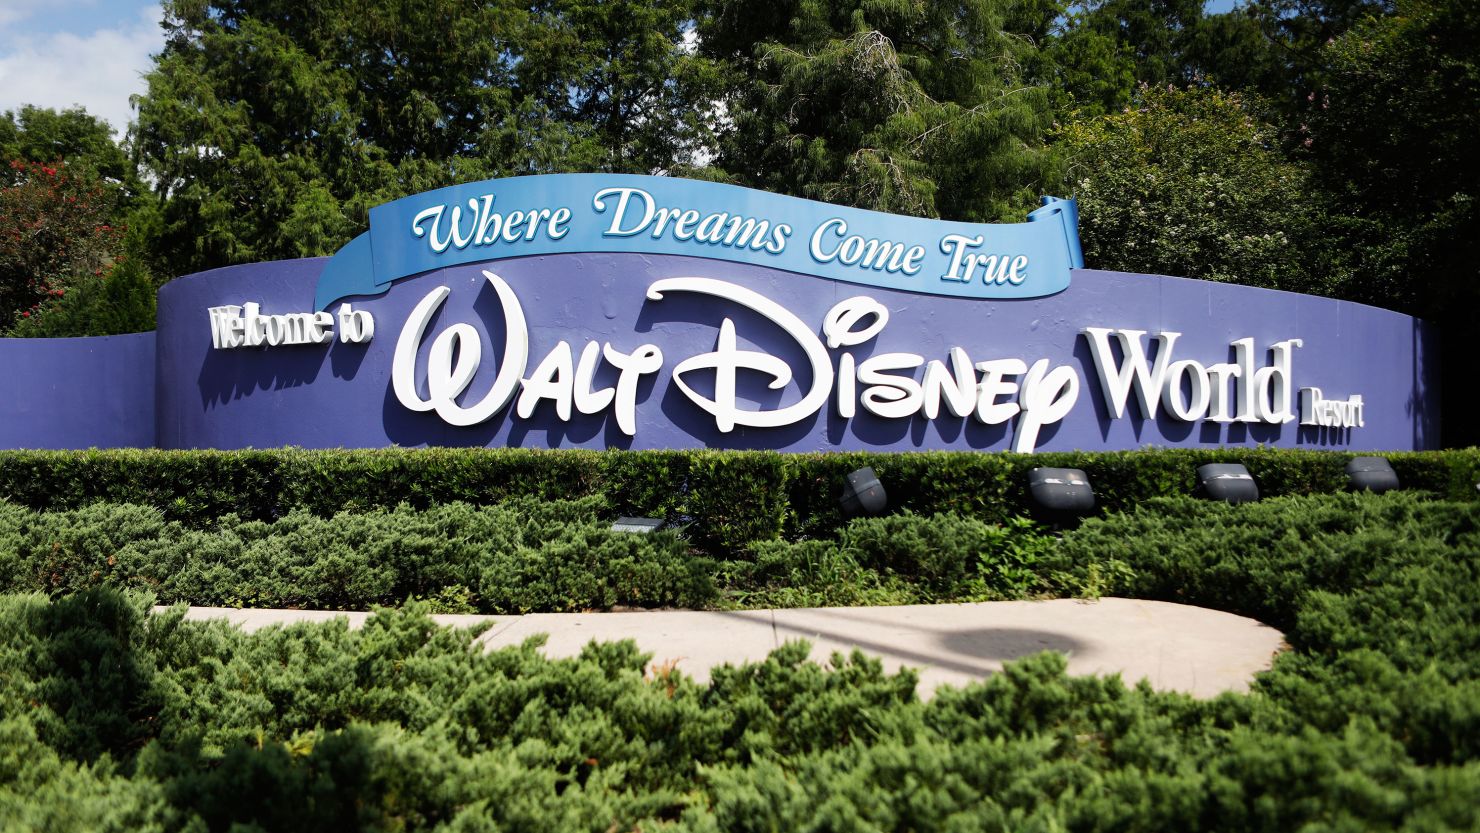 LAKE BUENA VISTA, FL - JULY 09: A view of the Walt Disney World theme park entrance on July 9, 2020 in Lake Buena Vista, Florida. The theme park is scheduled to reopen on Saturday despite a surge in new Covid-19 infections throughout Florida, including the central part of the state where Orlando is located. (Photo by Octavio Jones/Getty Images)